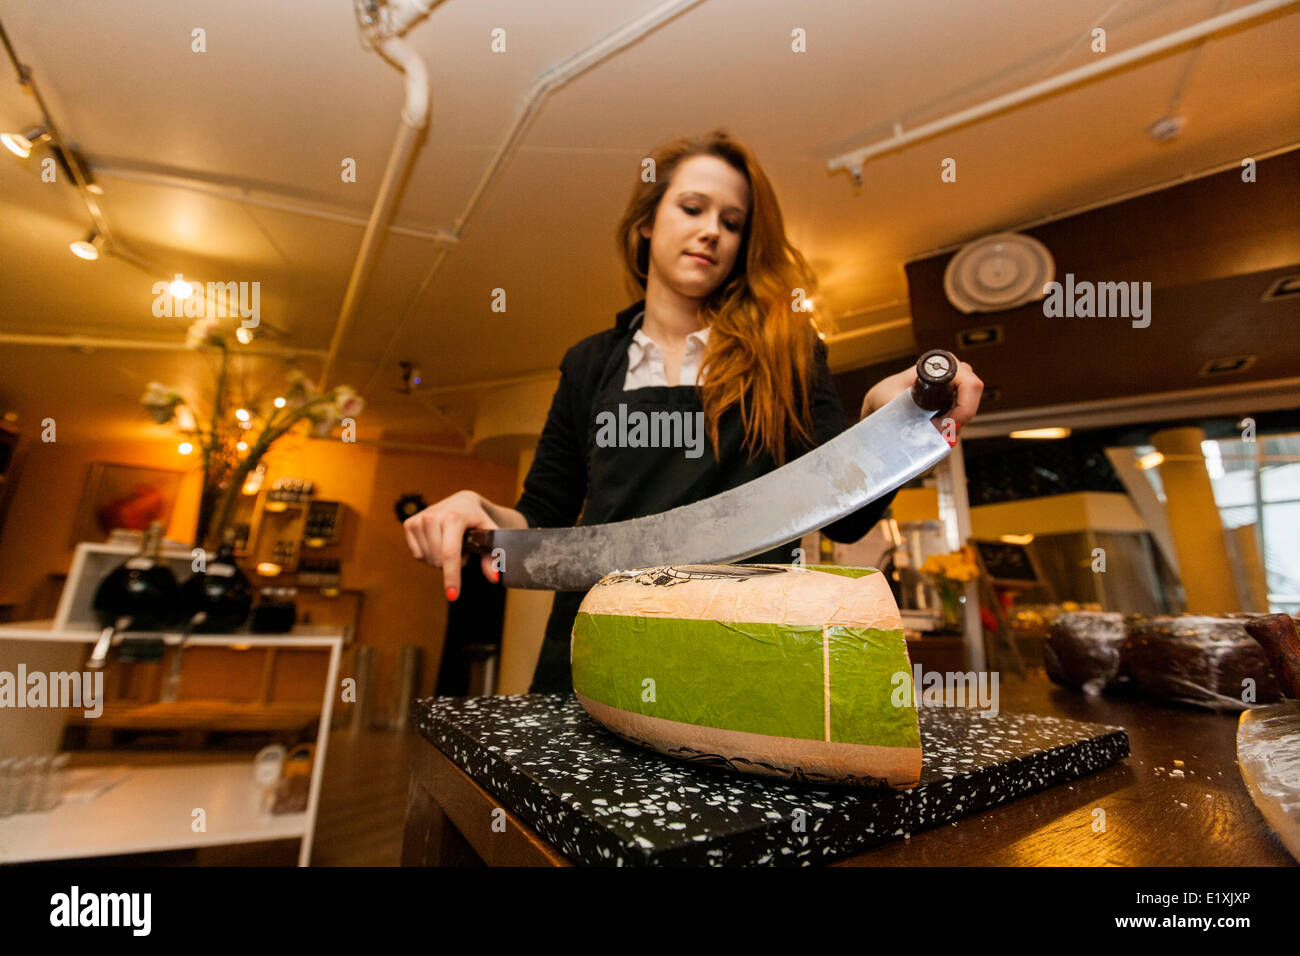 Female salesperson cutting cheese at store Stock Photo